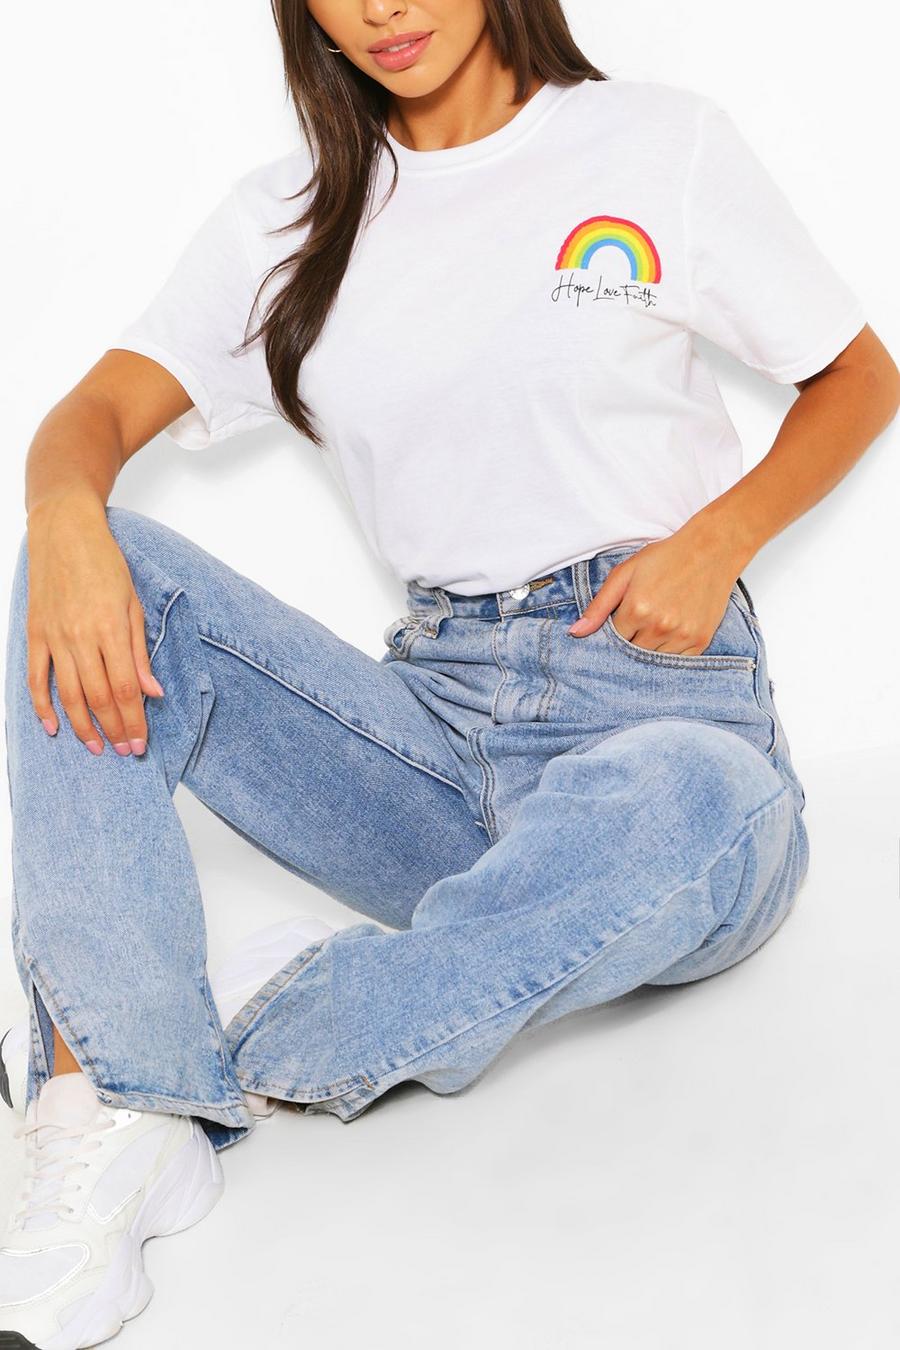 T-SHIRT DI BENEFICENZA NHS A MOTIVO ARCOBALENO CON TASCA image number 1